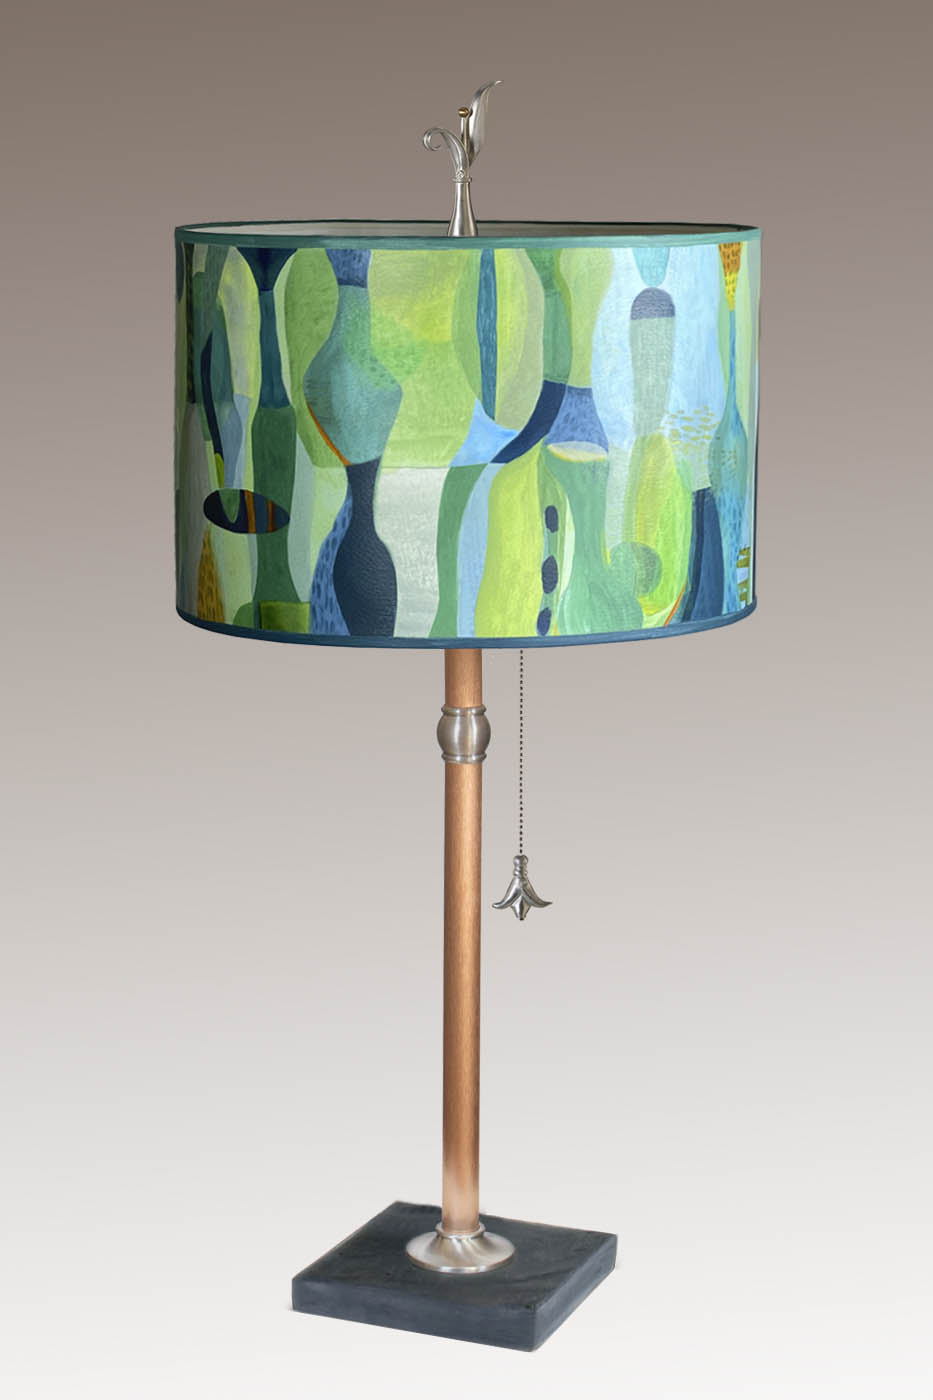 Janna Ugone &amp; Co Table Lamp Copper Table Lamp with Large Drum Shade in Riviera in Citrus